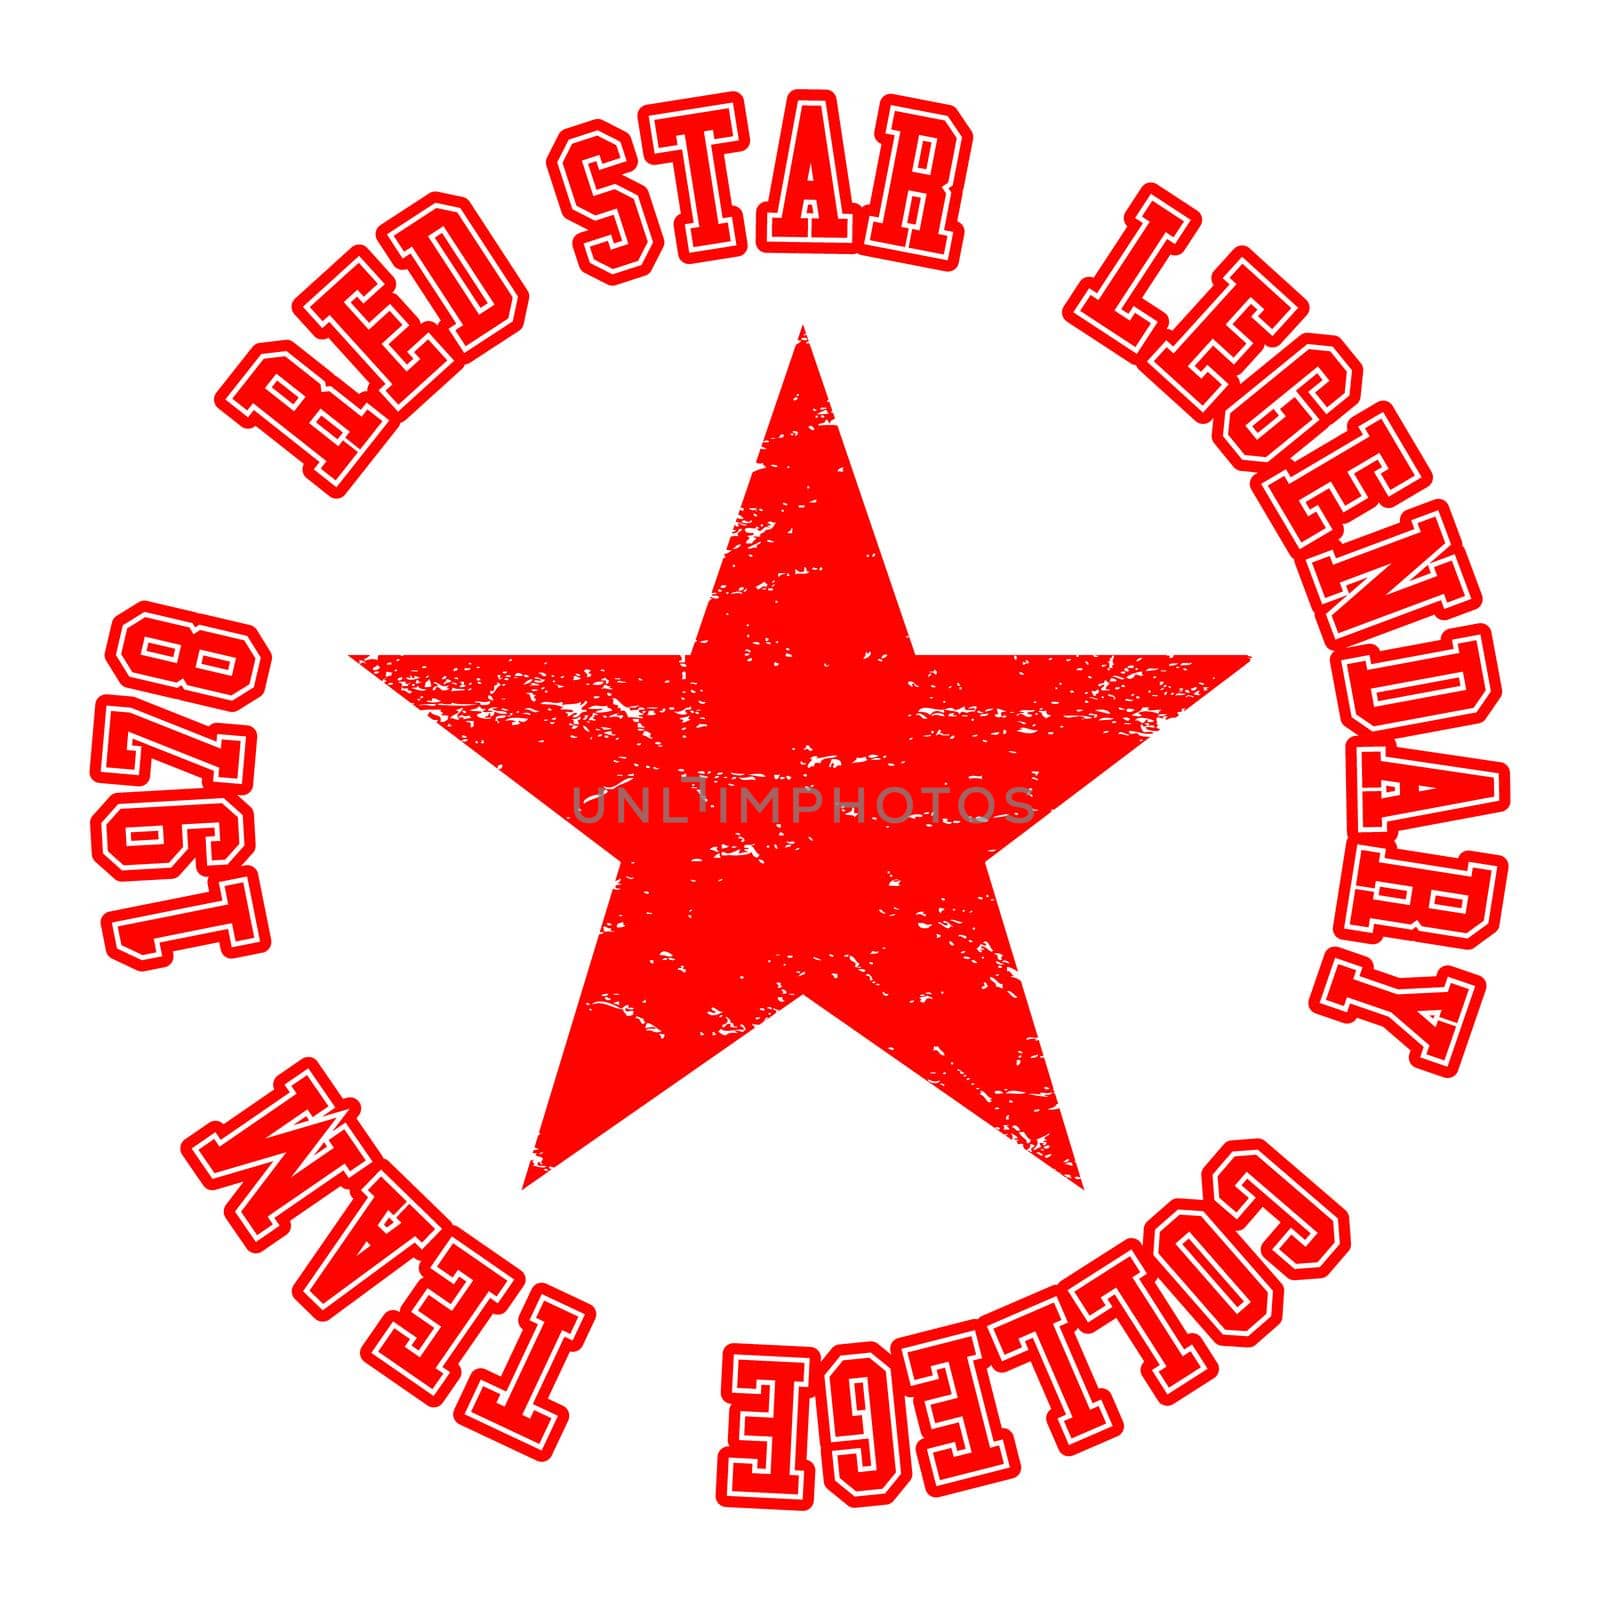 T-shirt print design. Red star vintage stamp. Printing and badge, applique, label for t-shirts, jeans, casual wear. Vector illustration.